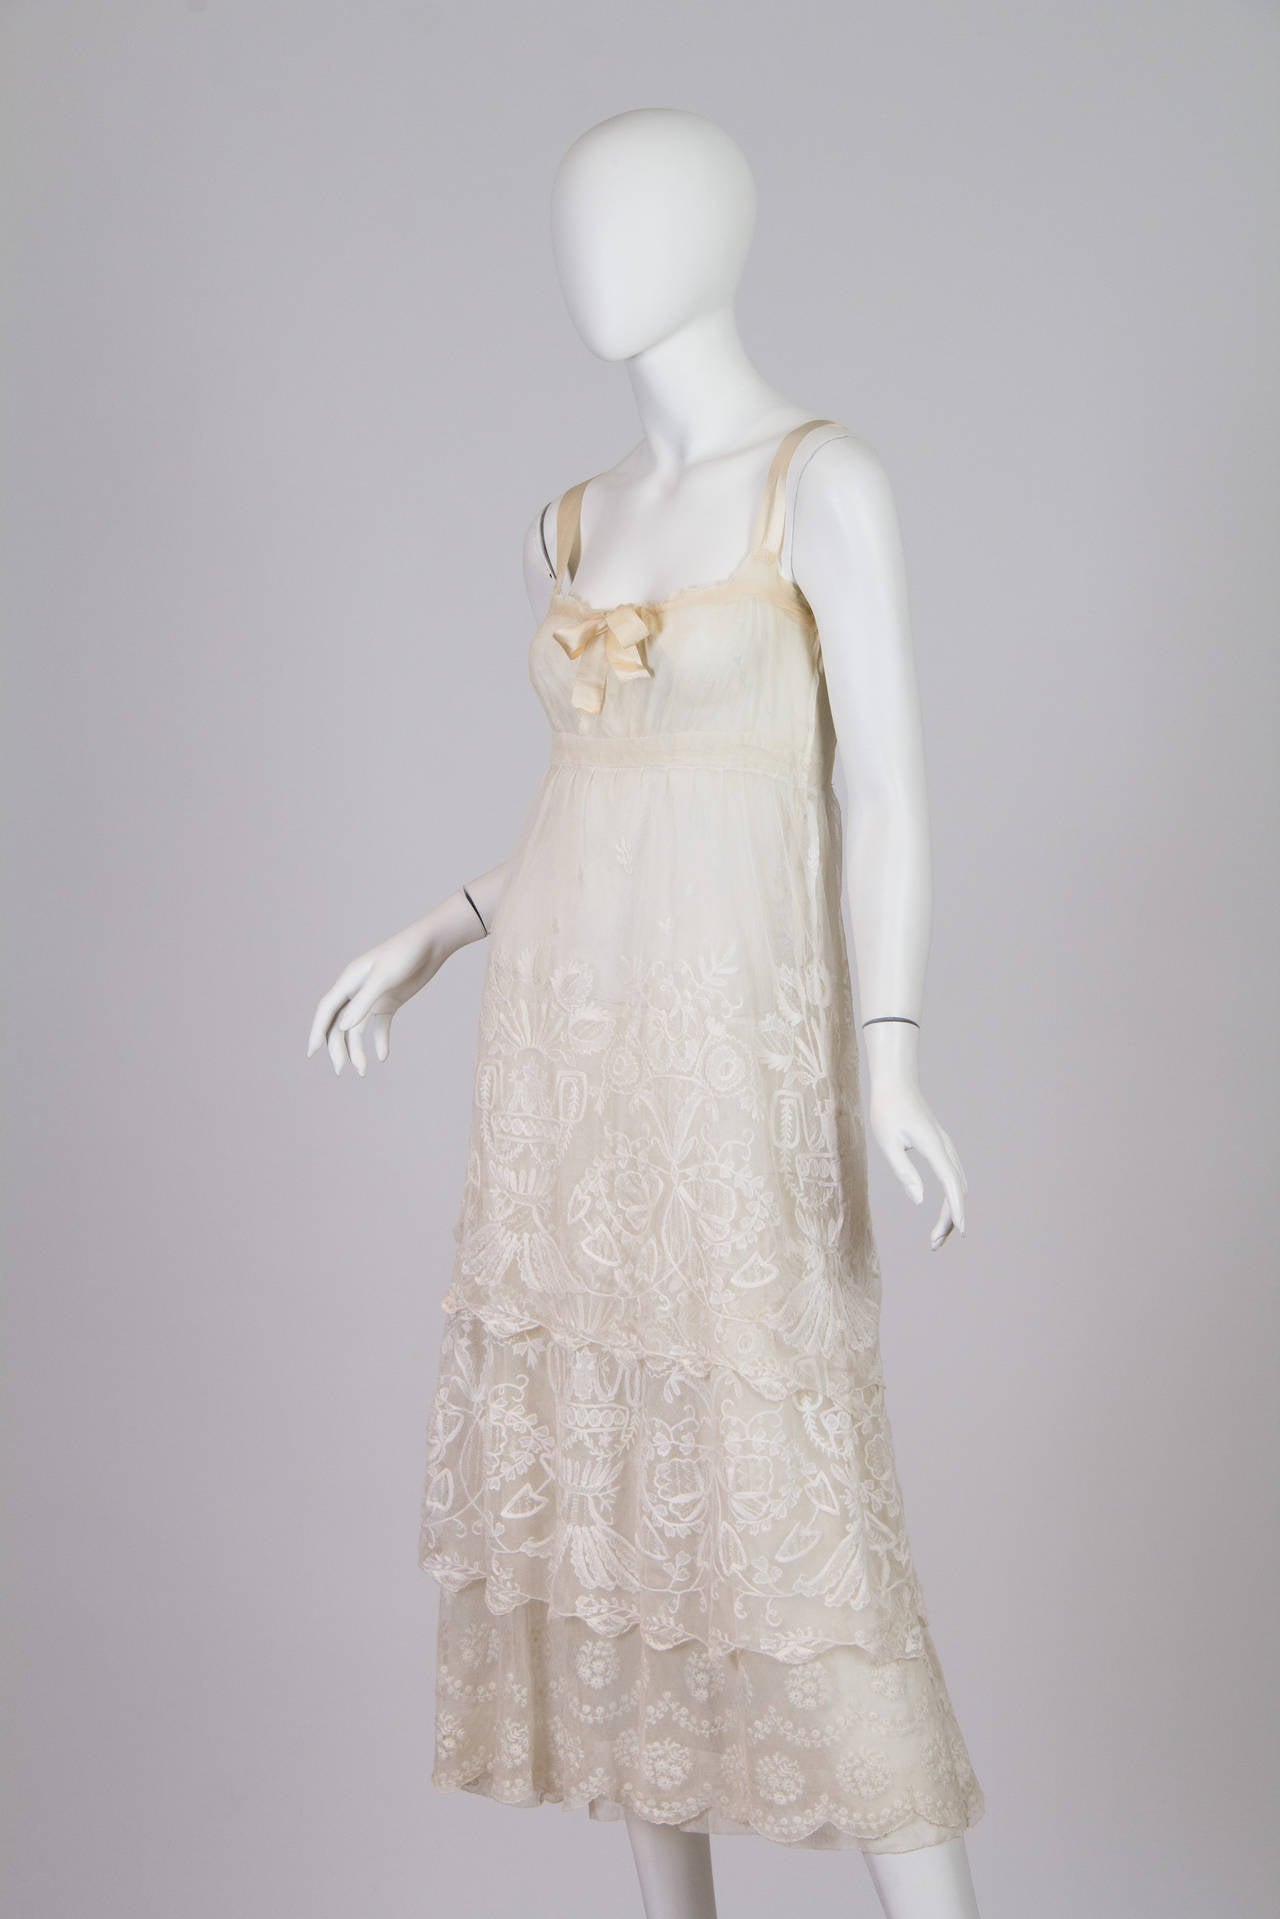 This is a lovely dress made in the later years of the 1910s, as Europe approached World War I. It is sheer cream cotton with an empire waistline and peach ribbon accents at the neckline and shoulders. The stunning white princess embroidery falls in